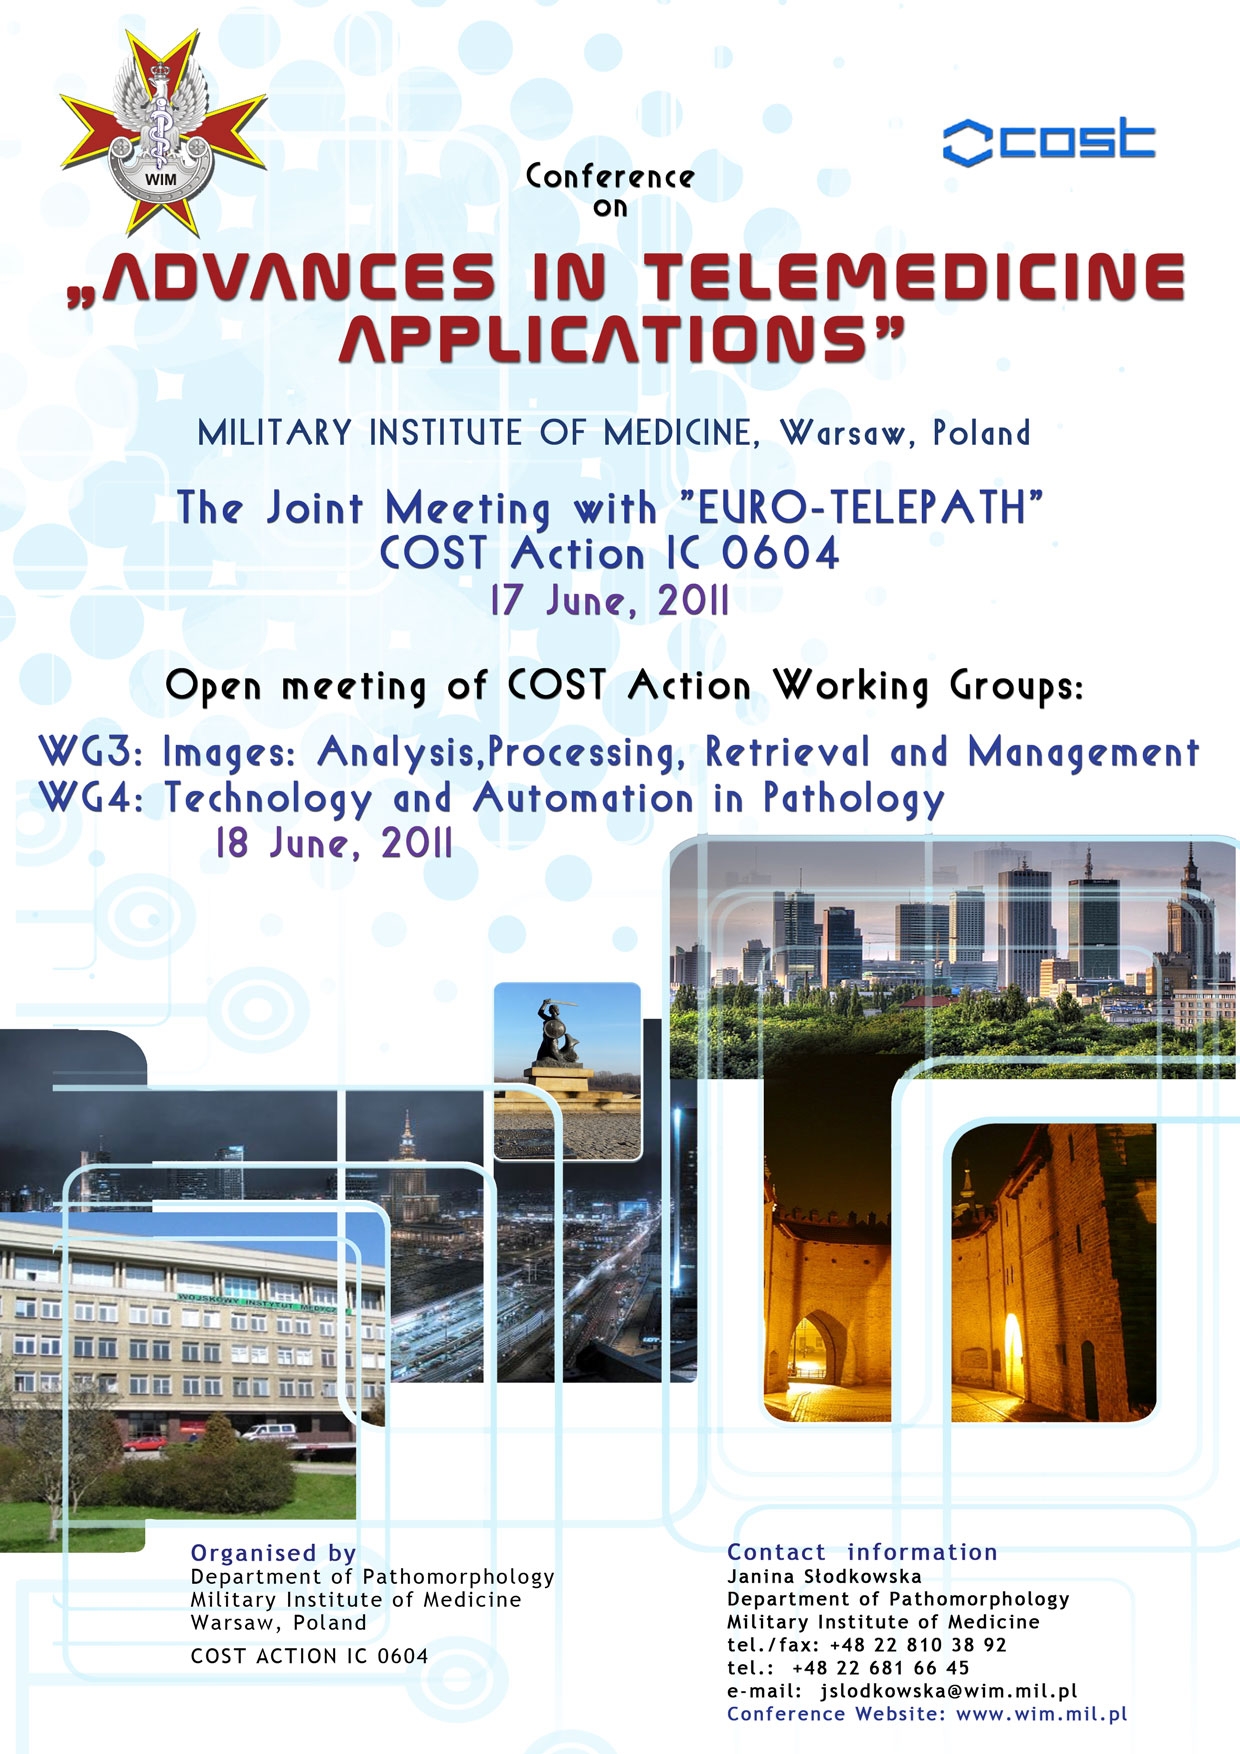 Conference on Advances in Telemedicine Applications